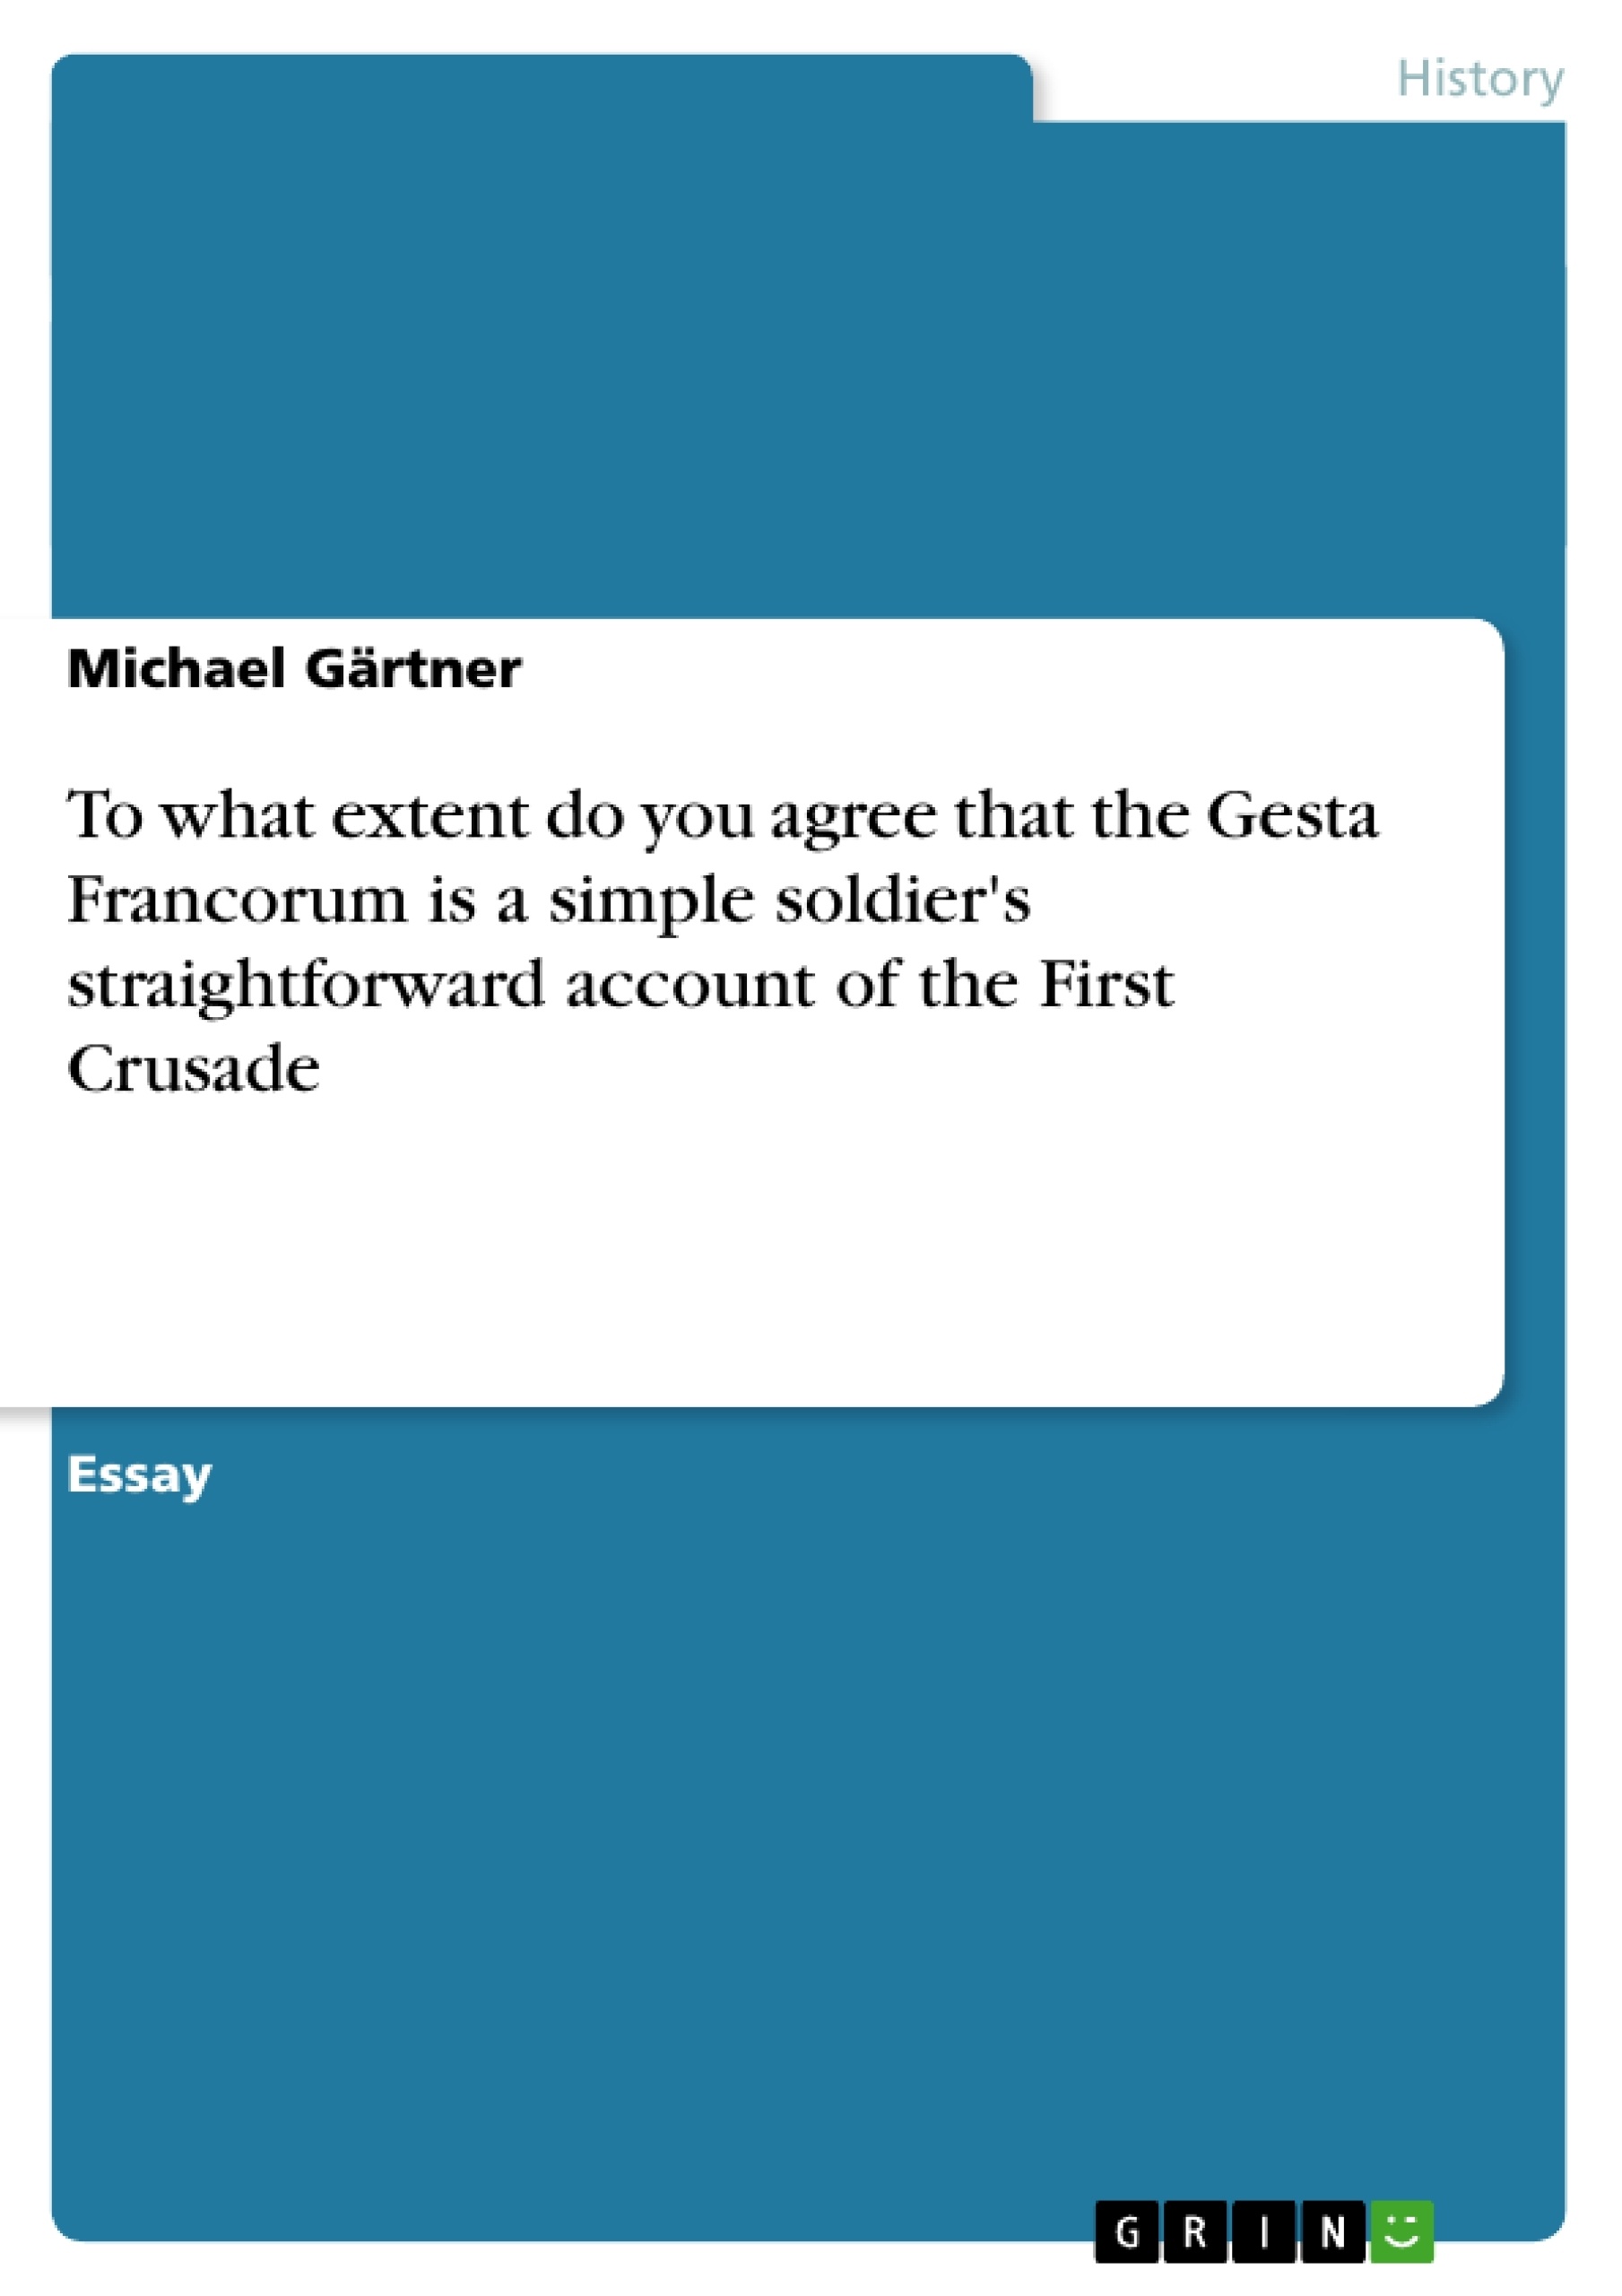 Title: To what extent do you agree that the Gesta Francorum is a simple soldier's straightforward account of the First Crusade